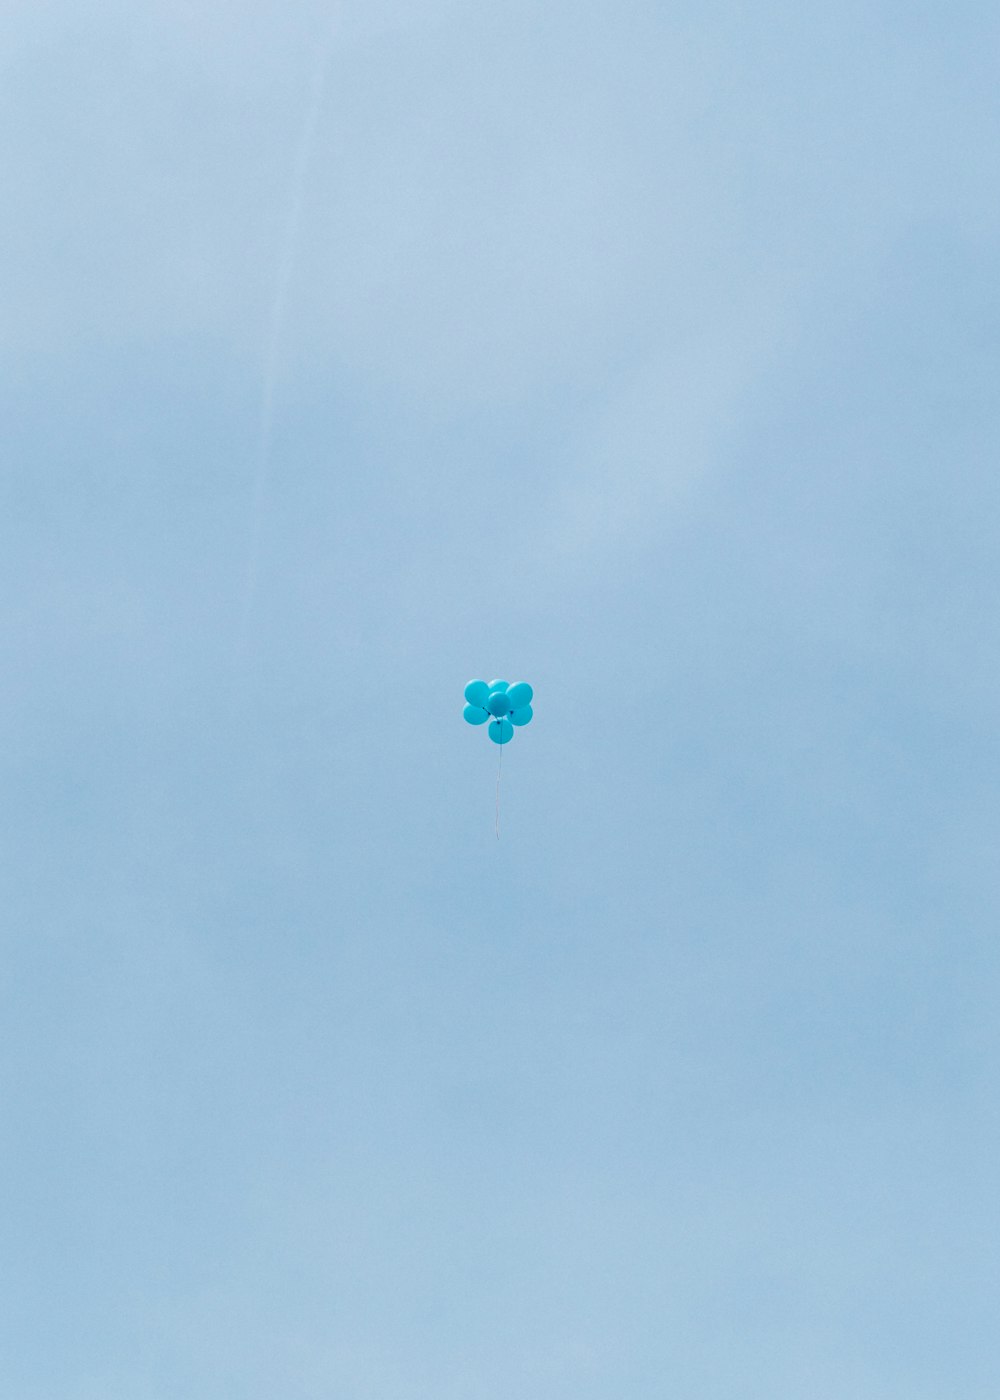 a couple of kites flying through a blue sky